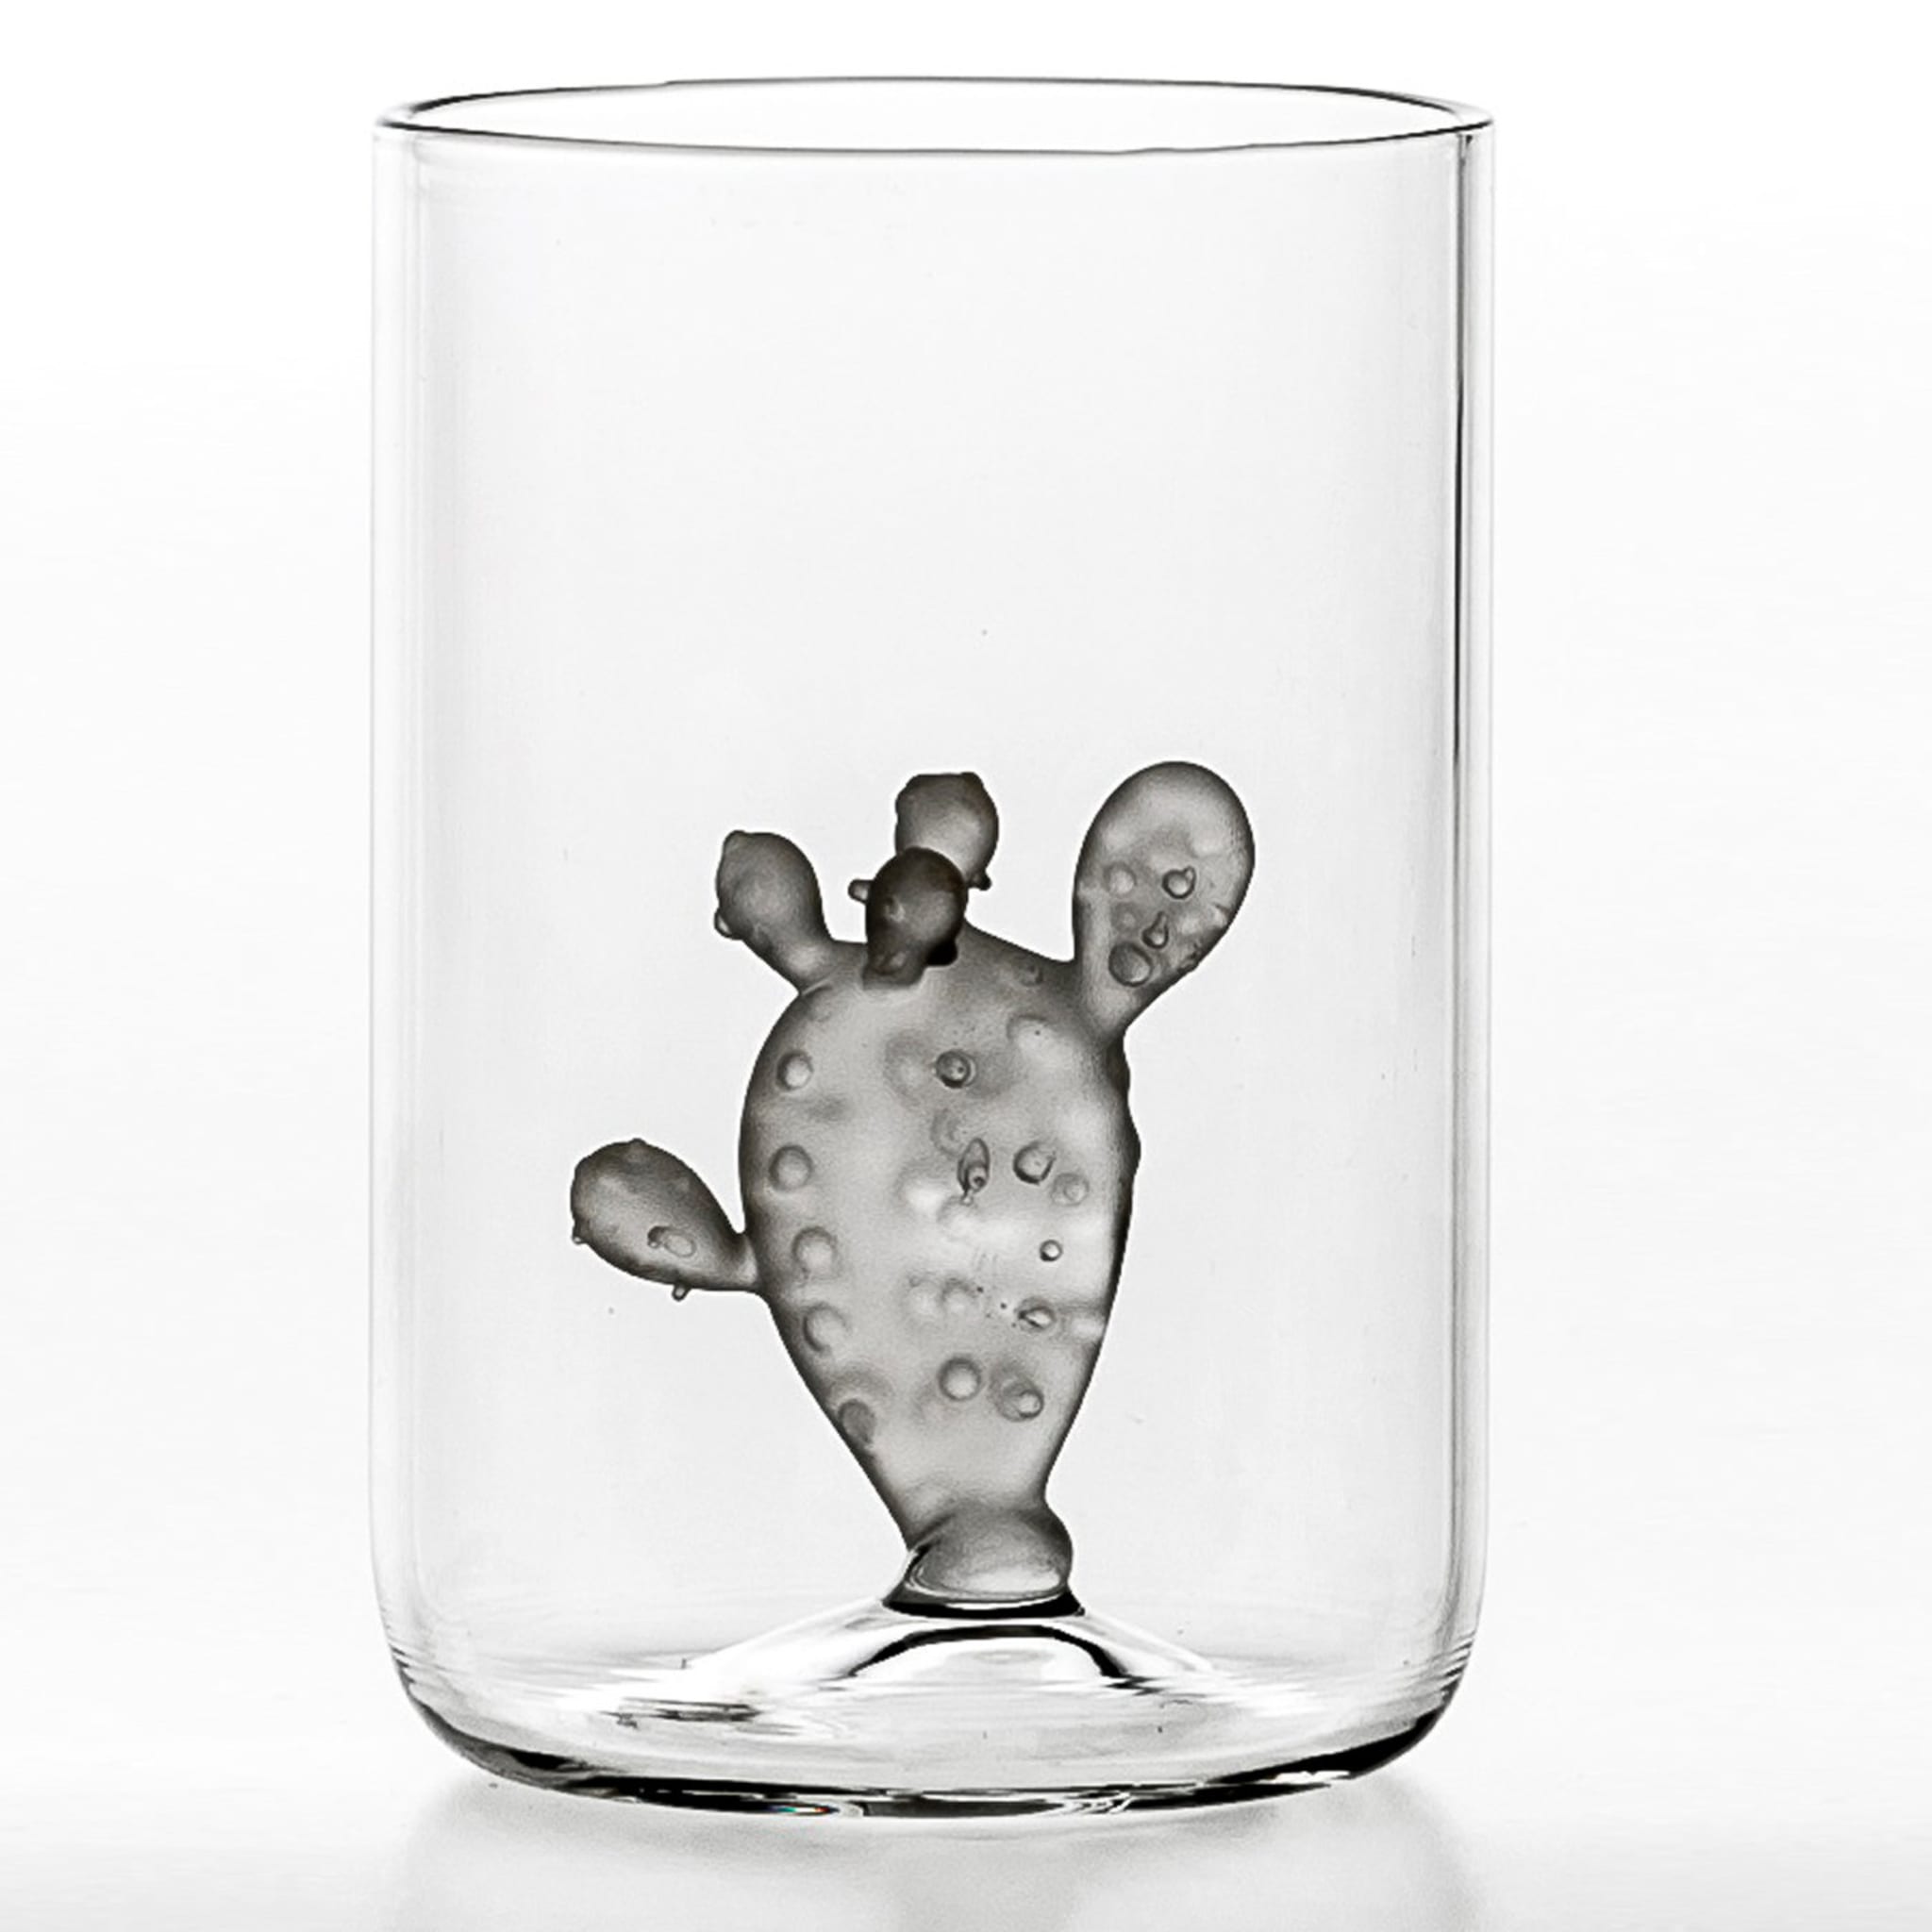 Set of 4 Glasses and 1 Jug Cactus Collection - Alternative view 3